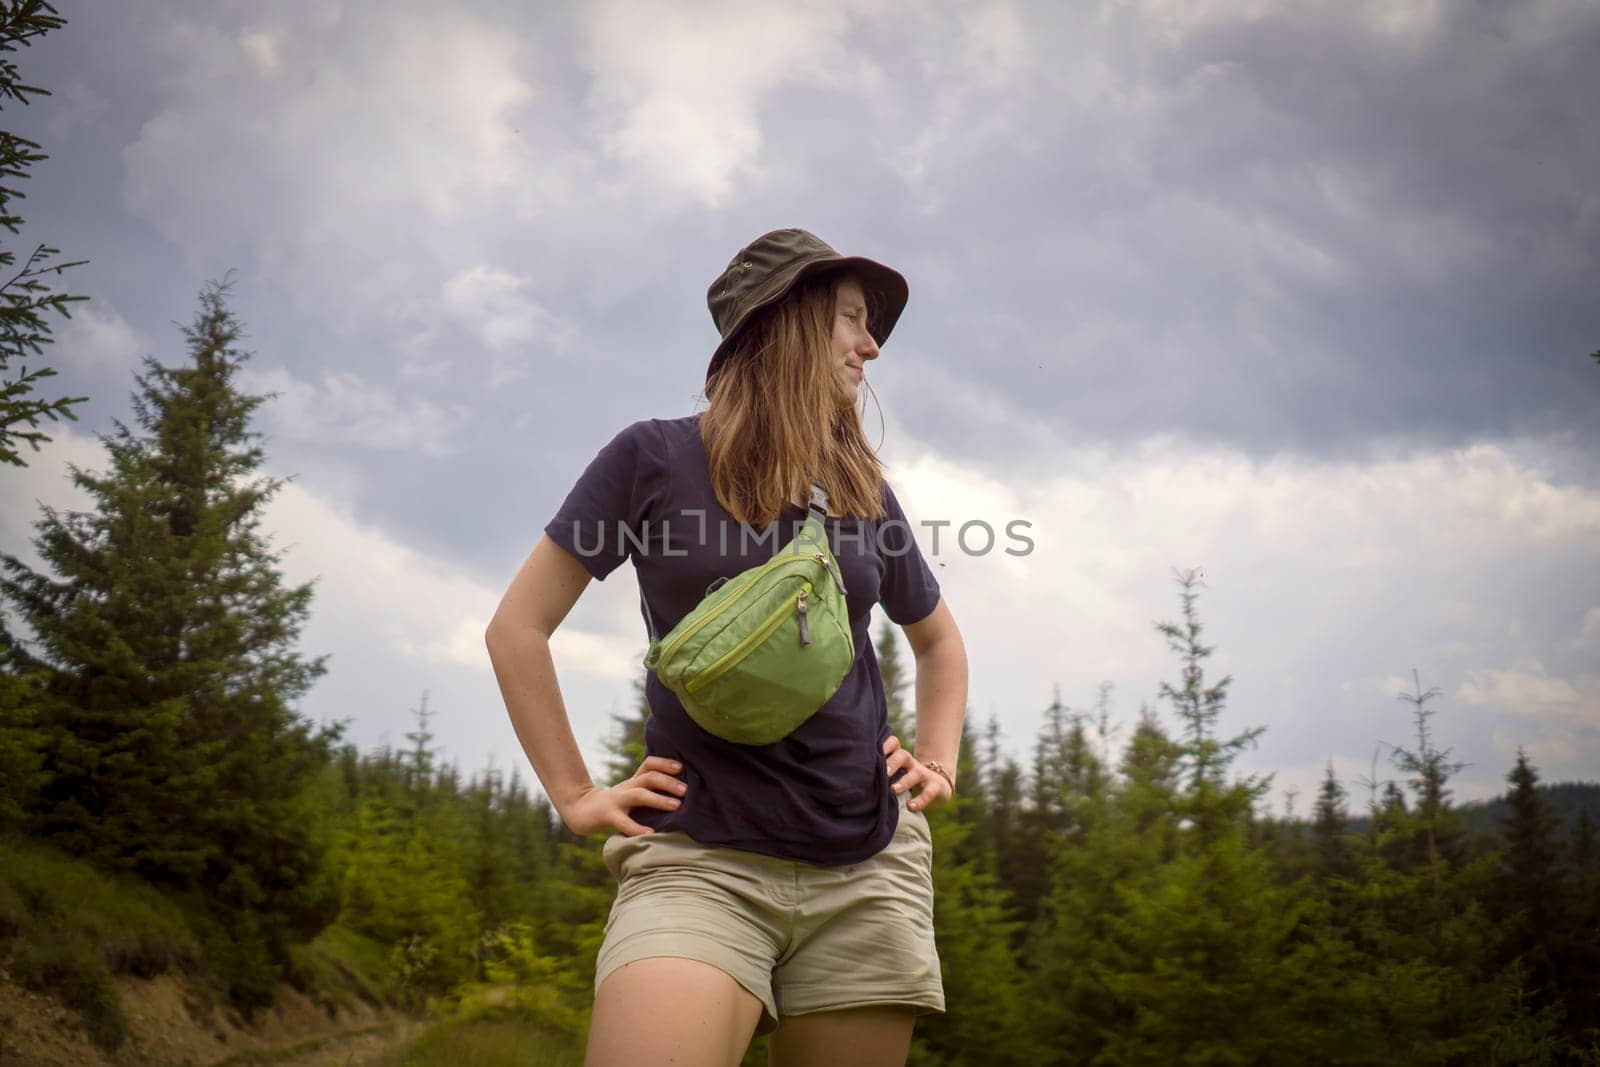 The girl walks in the mountains and the forest, a traveler is spending time active and enjoying tourism, hiking and trekking outdoors, a woman holds her waist bag.